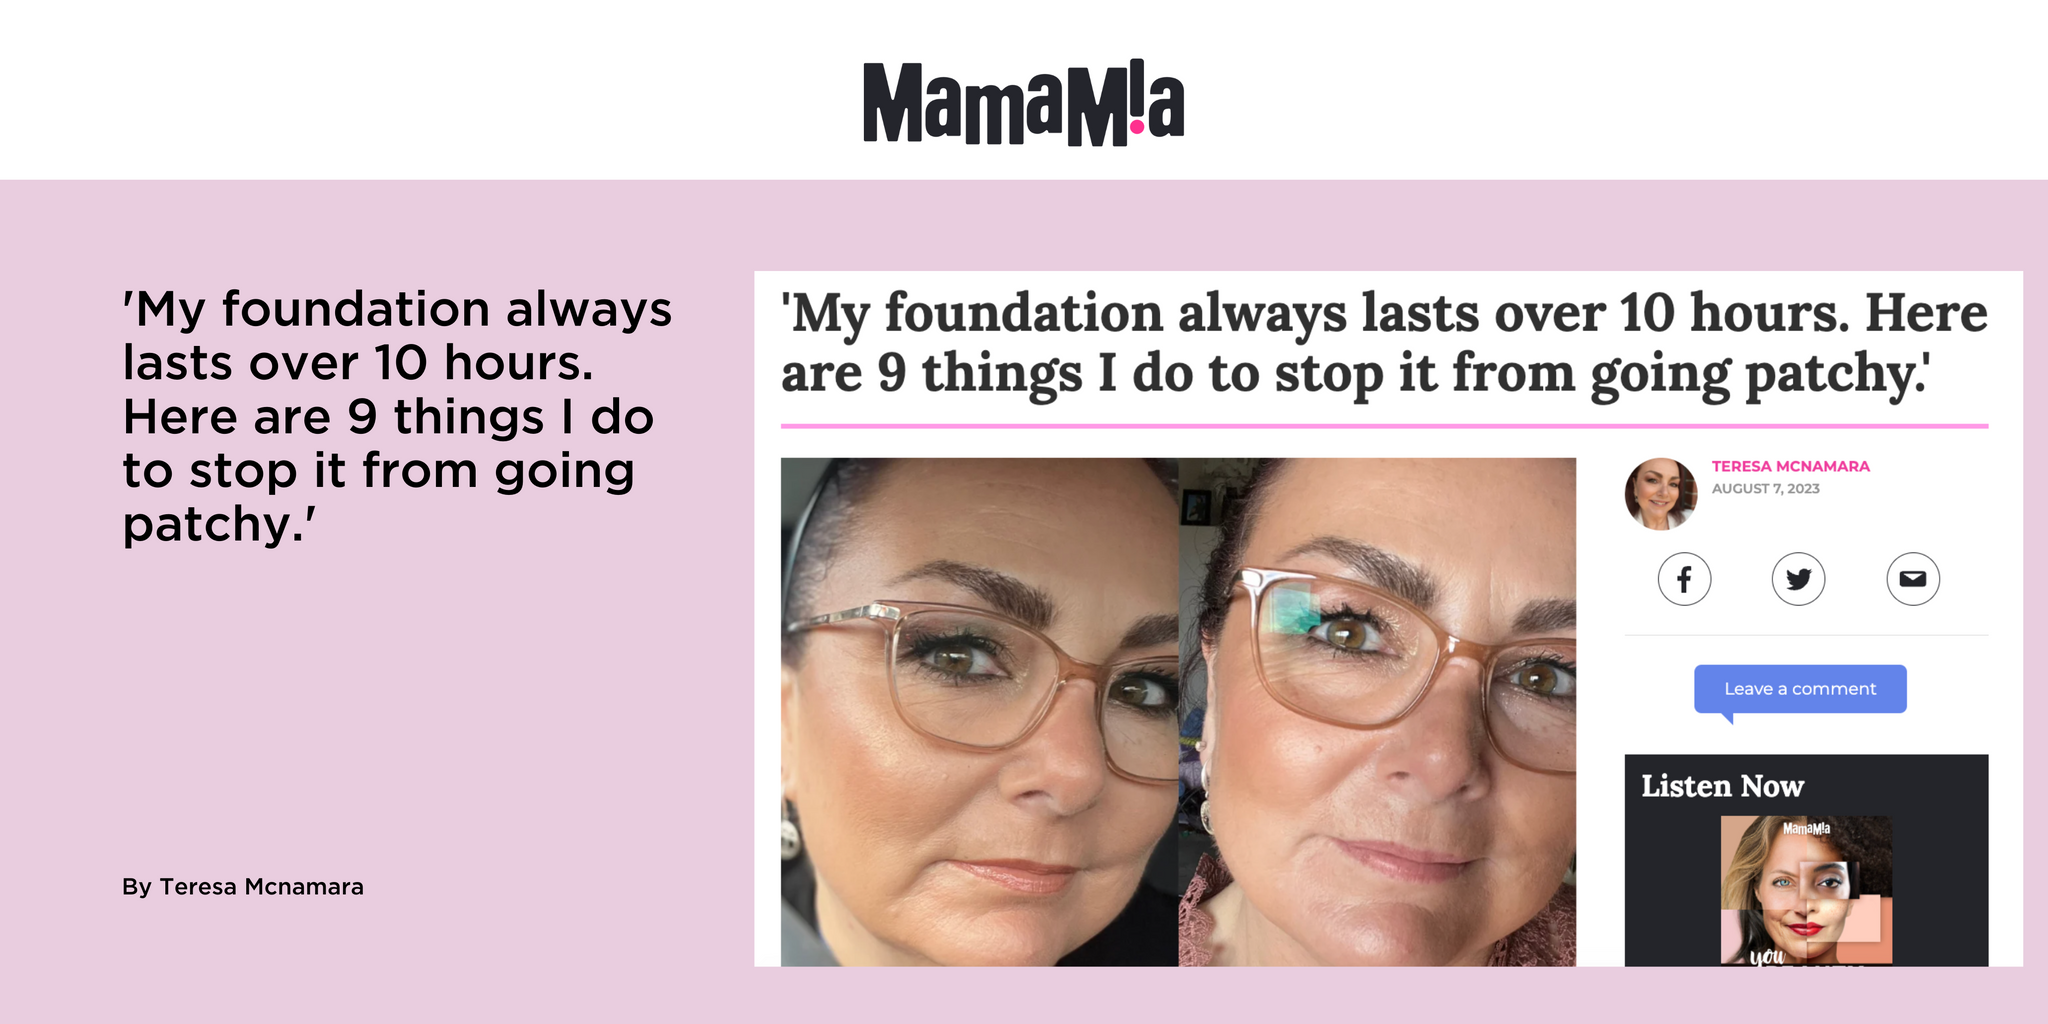 My foundation always lasts over 10 hours. Here are 9 things I do to stop it from going patchy.